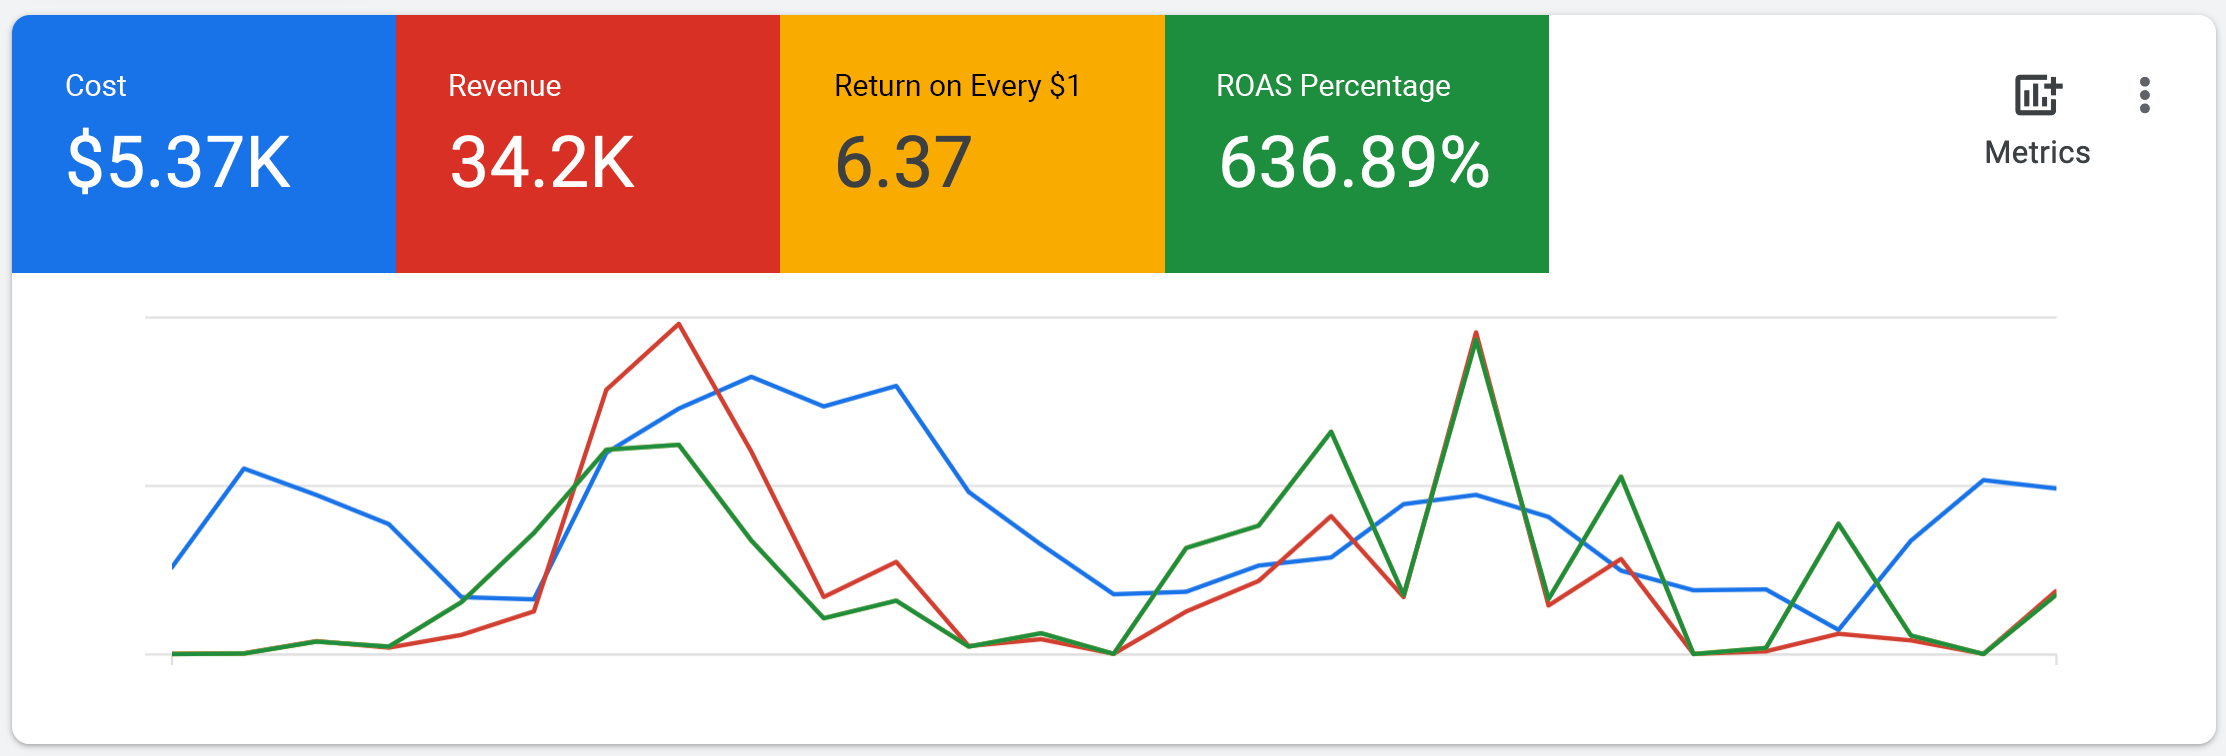 Example of a Google Ads accountb earning over $6 for every $1 spent on ads with is a ROAS of 6. Cost: $5,370, Revenue: $34,200, Return of every $1: $6.38, ROAS expressed as a percentage: 636,89%